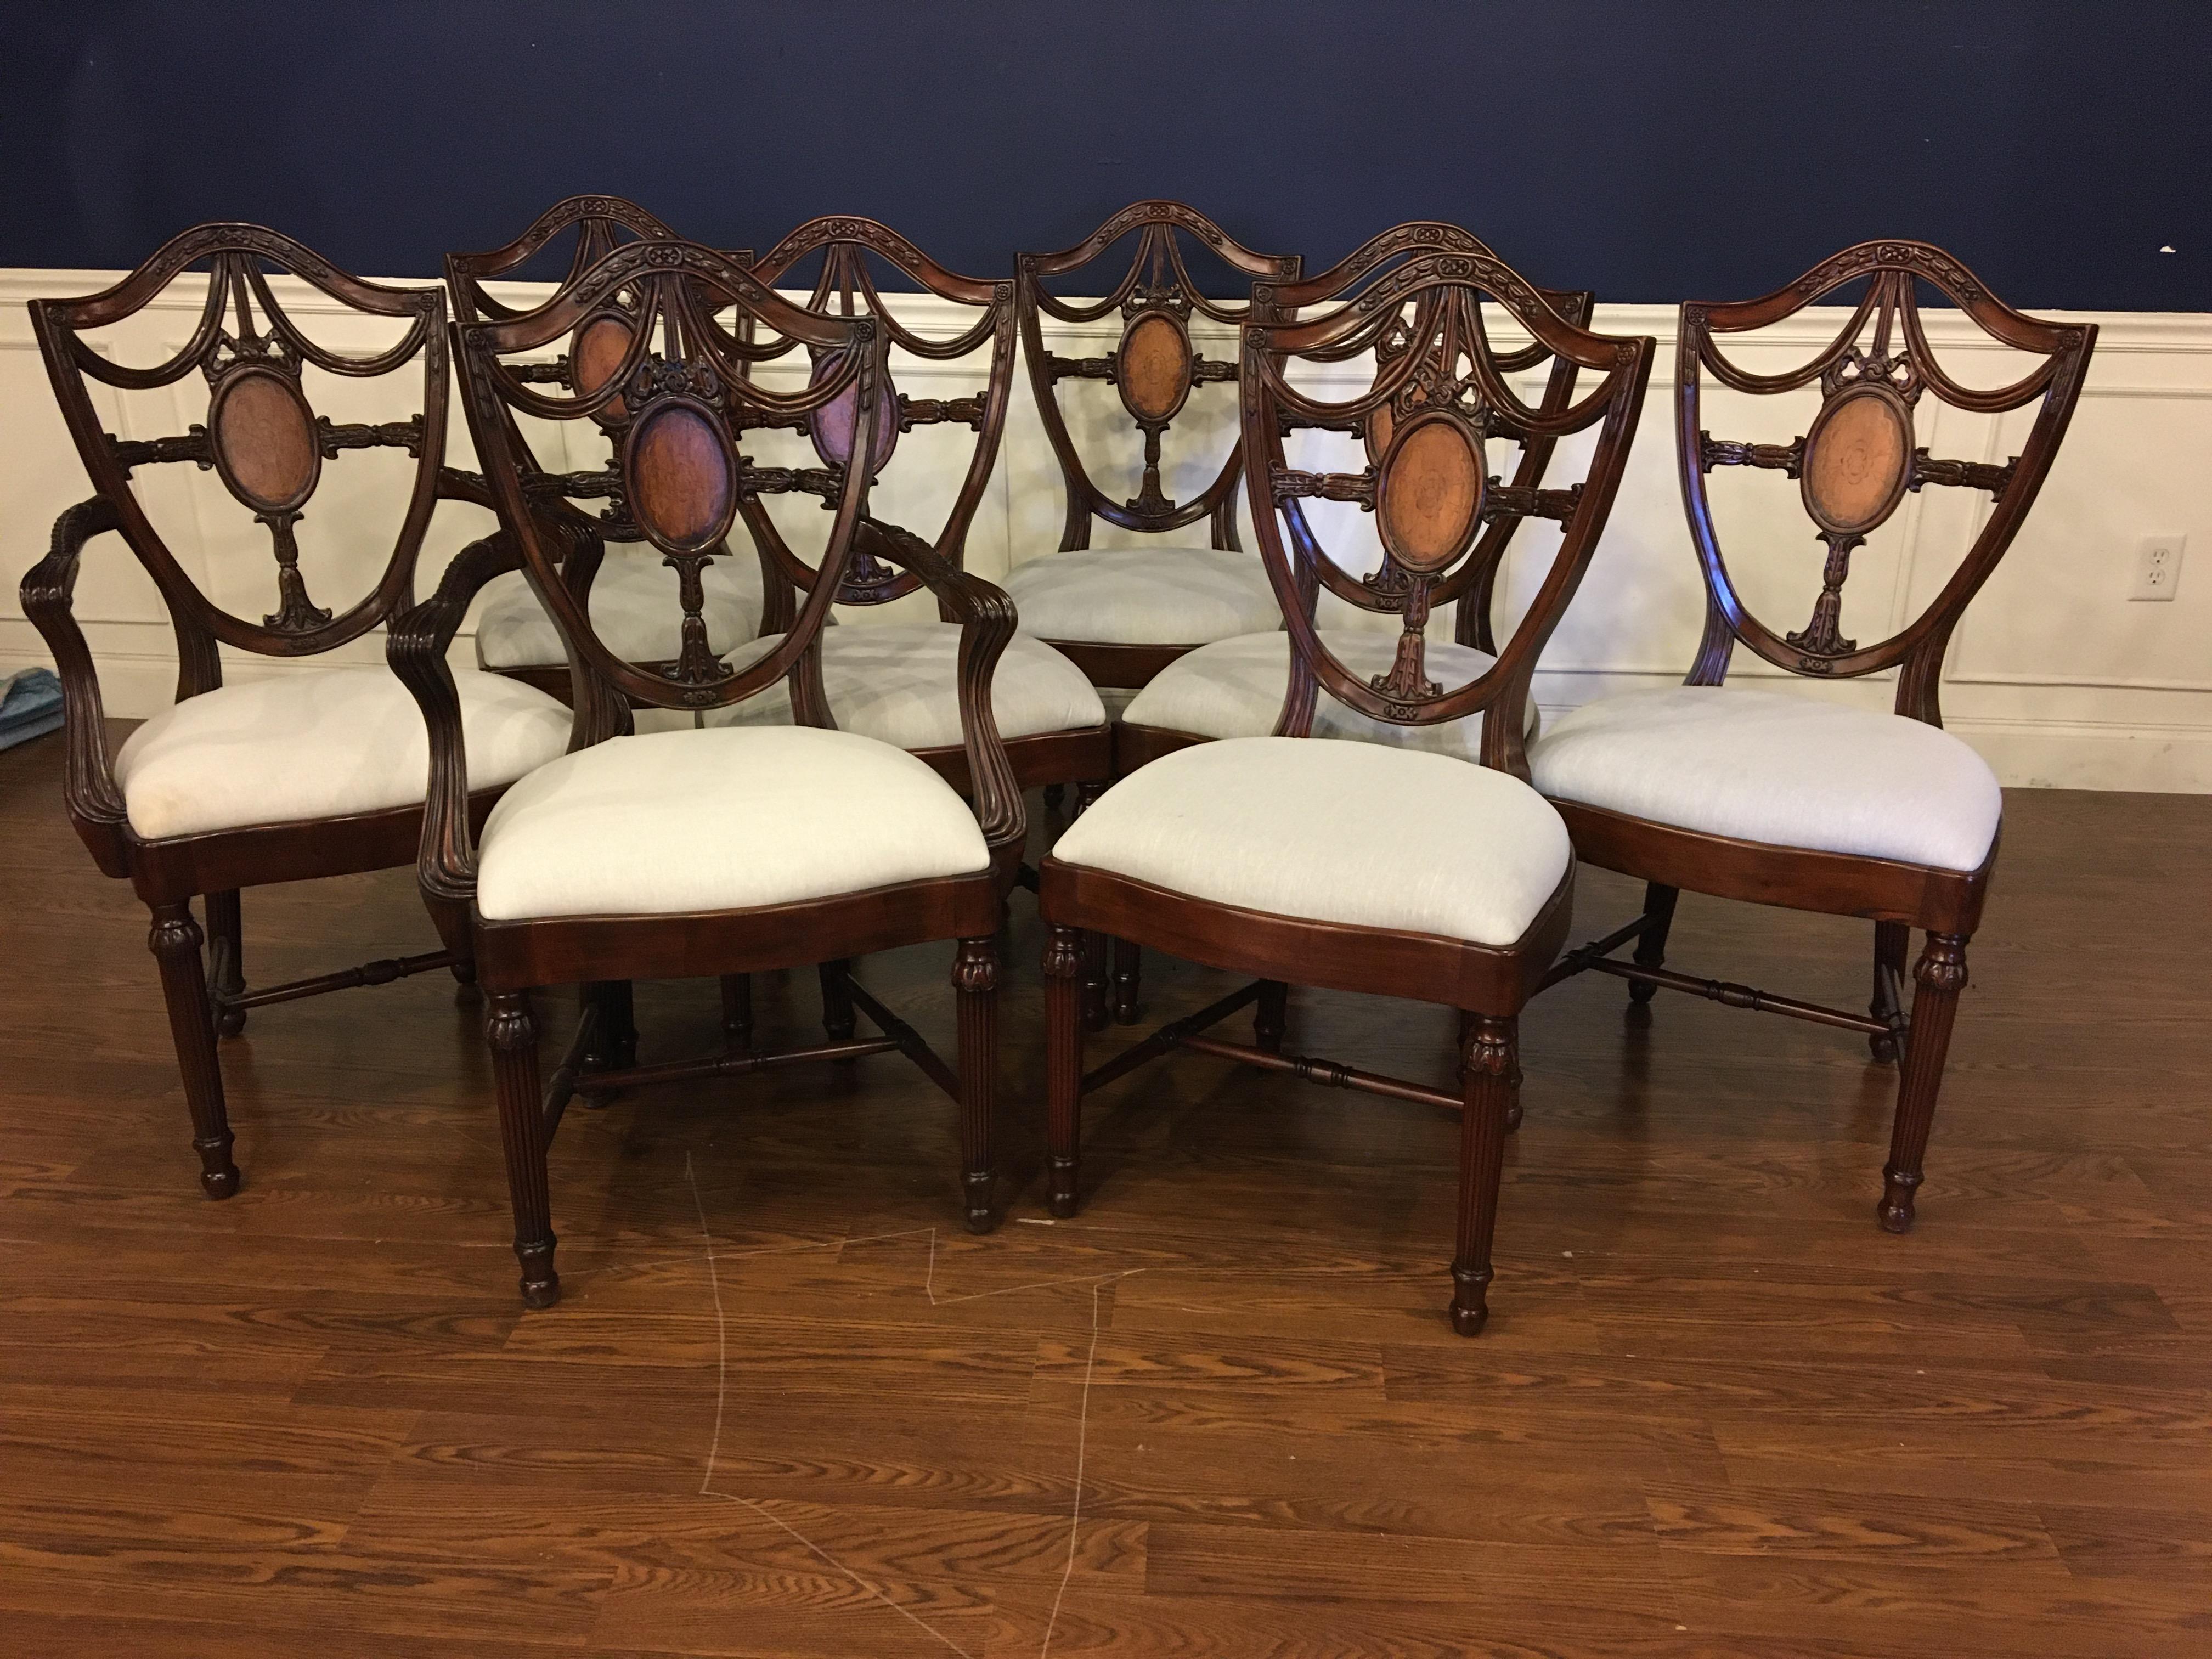 These are new traditional mahogany dining chairs. Their design was inspired by dining chairs from the Regency period. They feature Classic Shieldback styling. They have an understated elegance with the Sheraton style round fluted legs and delicate